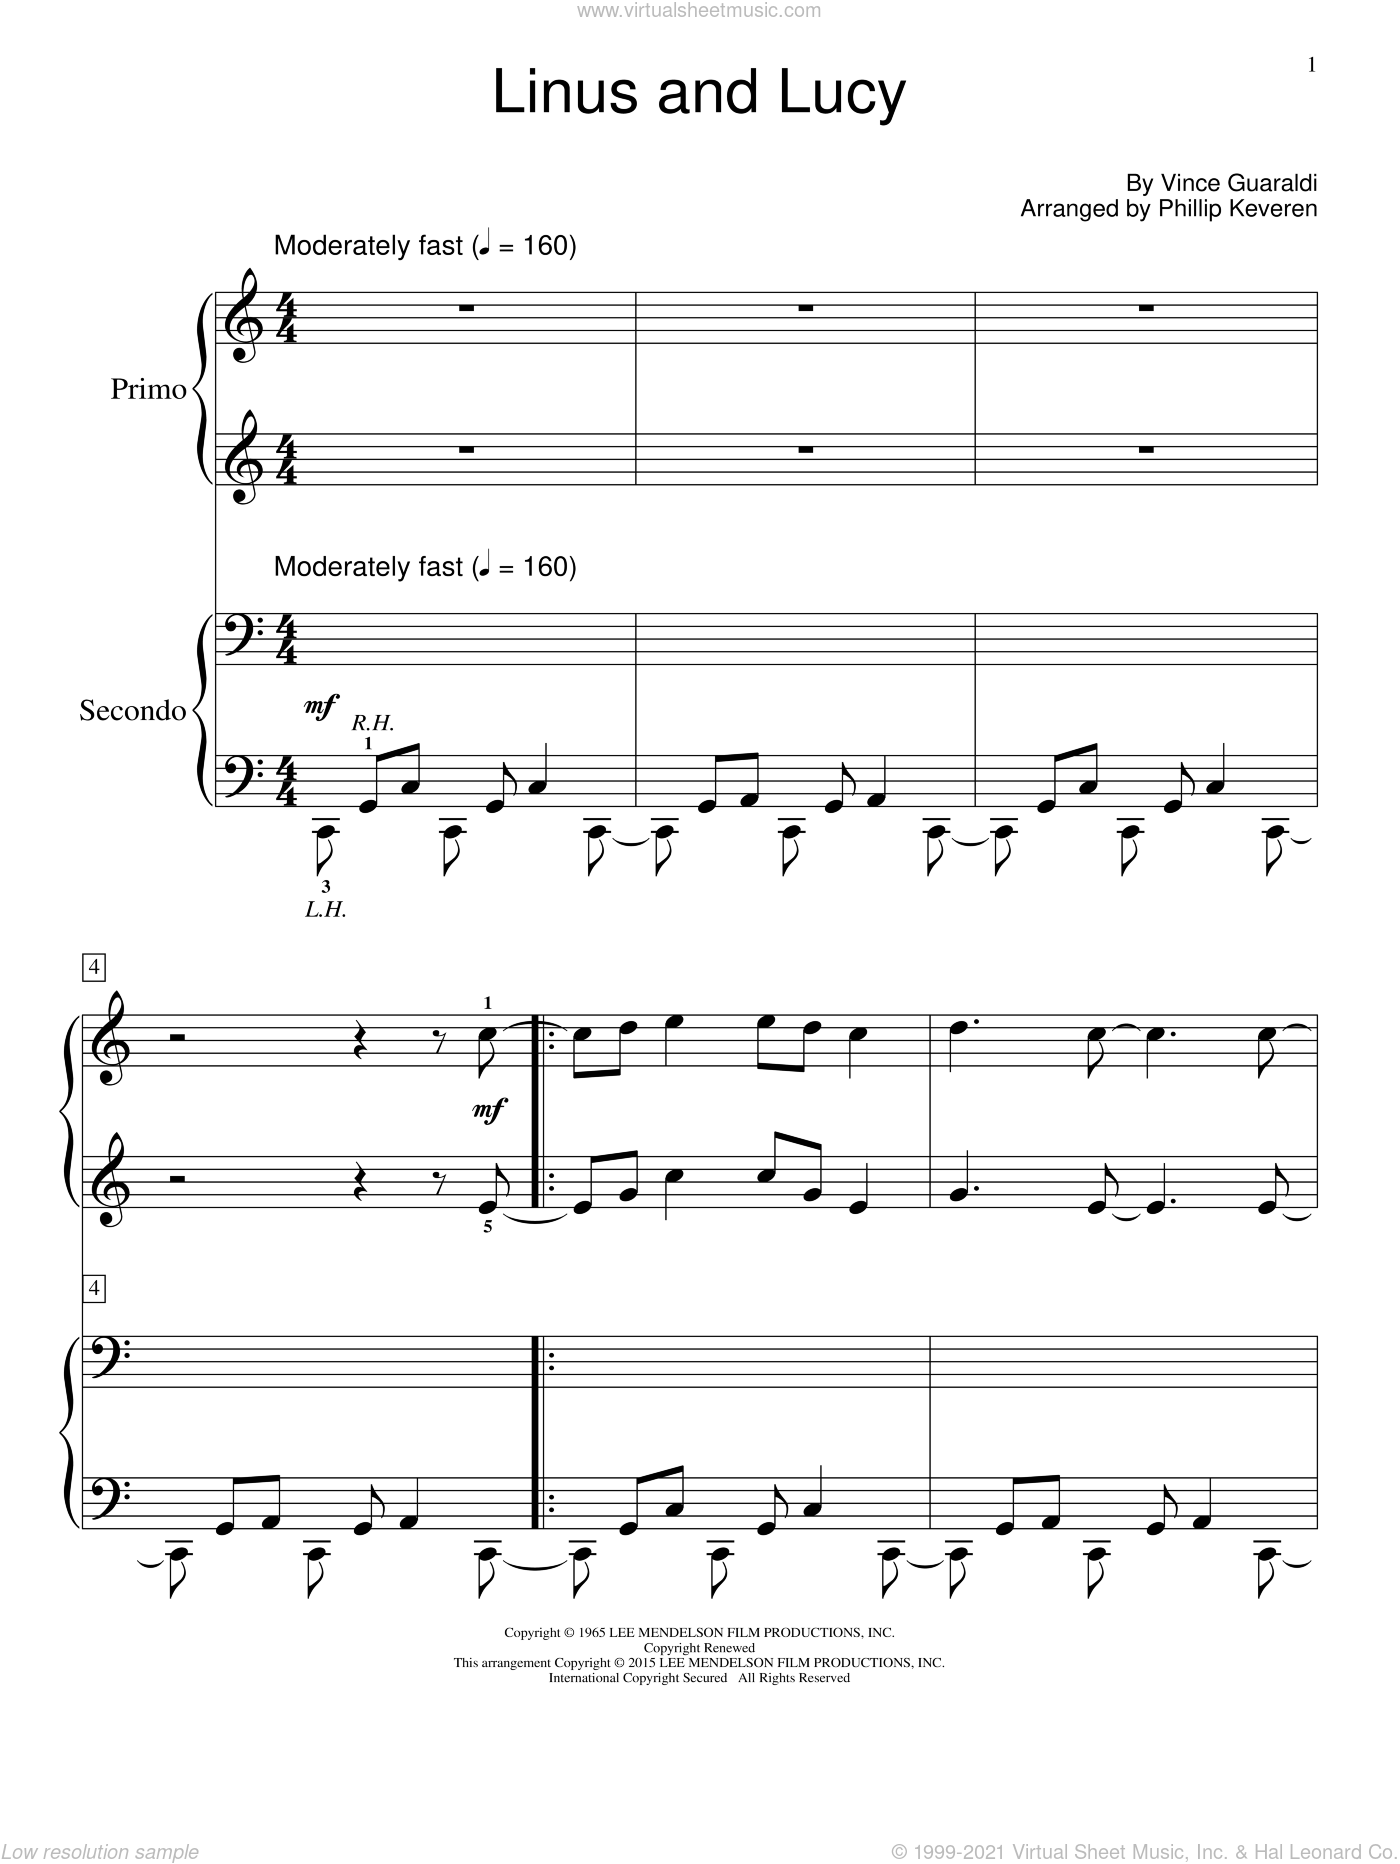 Guaraldi - Linus And Lucy sheet music for piano four hands ...